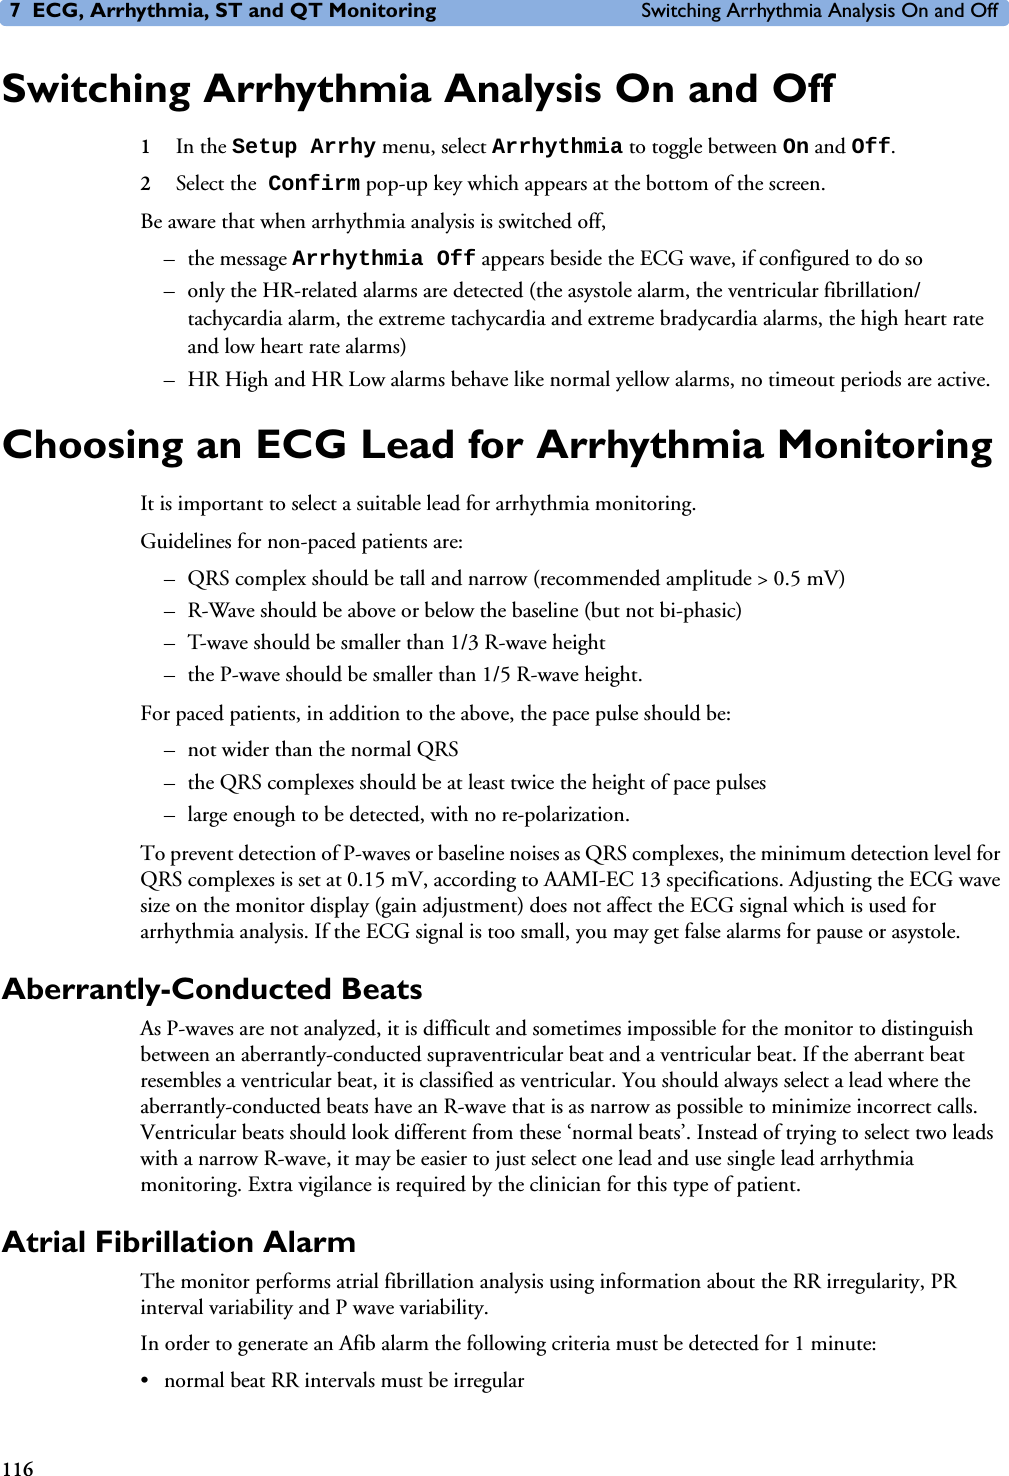 7 ECG, Arrhythmia, ST and QT Monitoring Switching Arrhythmia Analysis On and Off116Switching Arrhythmia Analysis On and Off1In the Setup Arrhy menu, select Arrhythmia to toggle between On and Off.2Select the Confirm pop-up key which appears at the bottom of the screen.Be aware that when arrhythmia analysis is switched off,–the message Arrhythmia Off appears beside the ECG wave, if configured to do so– only the HR-related alarms are detected (the asystole alarm, the ventricular fibrillation/tachycardia alarm, the extreme tachycardia and extreme bradycardia alarms, the high heart rate and low heart rate alarms)– HR High and HR Low alarms behave like normal yellow alarms, no timeout periods are active.Choosing an ECG Lead for Arrhythmia MonitoringIt is important to select a suitable lead for arrhythmia monitoring. Guidelines for non-paced patients are: – QRS complex should be tall and narrow (recommended amplitude &gt; 0.5 mV) – R-Wave should be above or below the baseline (but not bi-phasic) – T-wave should be smaller than 1/3 R-wave height – the P-wave should be smaller than 1/5 R-wave height.For paced patients, in addition to the above, the pace pulse should be:– not wider than the normal QRS– the QRS complexes should be at least twice the height of pace pulses– large enough to be detected, with no re-polarization.To prevent detection of P-waves or baseline noises as QRS complexes, the minimum detection level for QRS complexes is set at 0.15 mV, according to AAMI-EC 13 specifications. Adjusting the ECG wave size on the monitor display (gain adjustment) does not affect the ECG signal which is used for arrhythmia analysis. If the ECG signal is too small, you may get false alarms for pause or asystole. Aberrantly-Conducted BeatsAs P-waves are not analyzed, it is difficult and sometimes impossible for the monitor to distinguish between an aberrantly-conducted supraventricular beat and a ventricular beat. If the aberrant beat resembles a ventricular beat, it is classified as ventricular. You should always select a lead where the aberrantly-conducted beats have an R-wave that is as narrow as possible to minimize incorrect calls. Ventricular beats should look different from these ‘normal beats’. Instead of trying to select two leads with a narrow R-wave, it may be easier to just select one lead and use single lead arrhythmia monitoring. Extra vigilance is required by the clinician for this type of patient.Atrial Fibrillation AlarmThe monitor performs atrial fibrillation analysis using information about the RR irregularity, PR interval variability and P wave variability.In order to generate an Afib alarm the following criteria must be detected for 1 minute:• normal beat RR intervals must be irregular